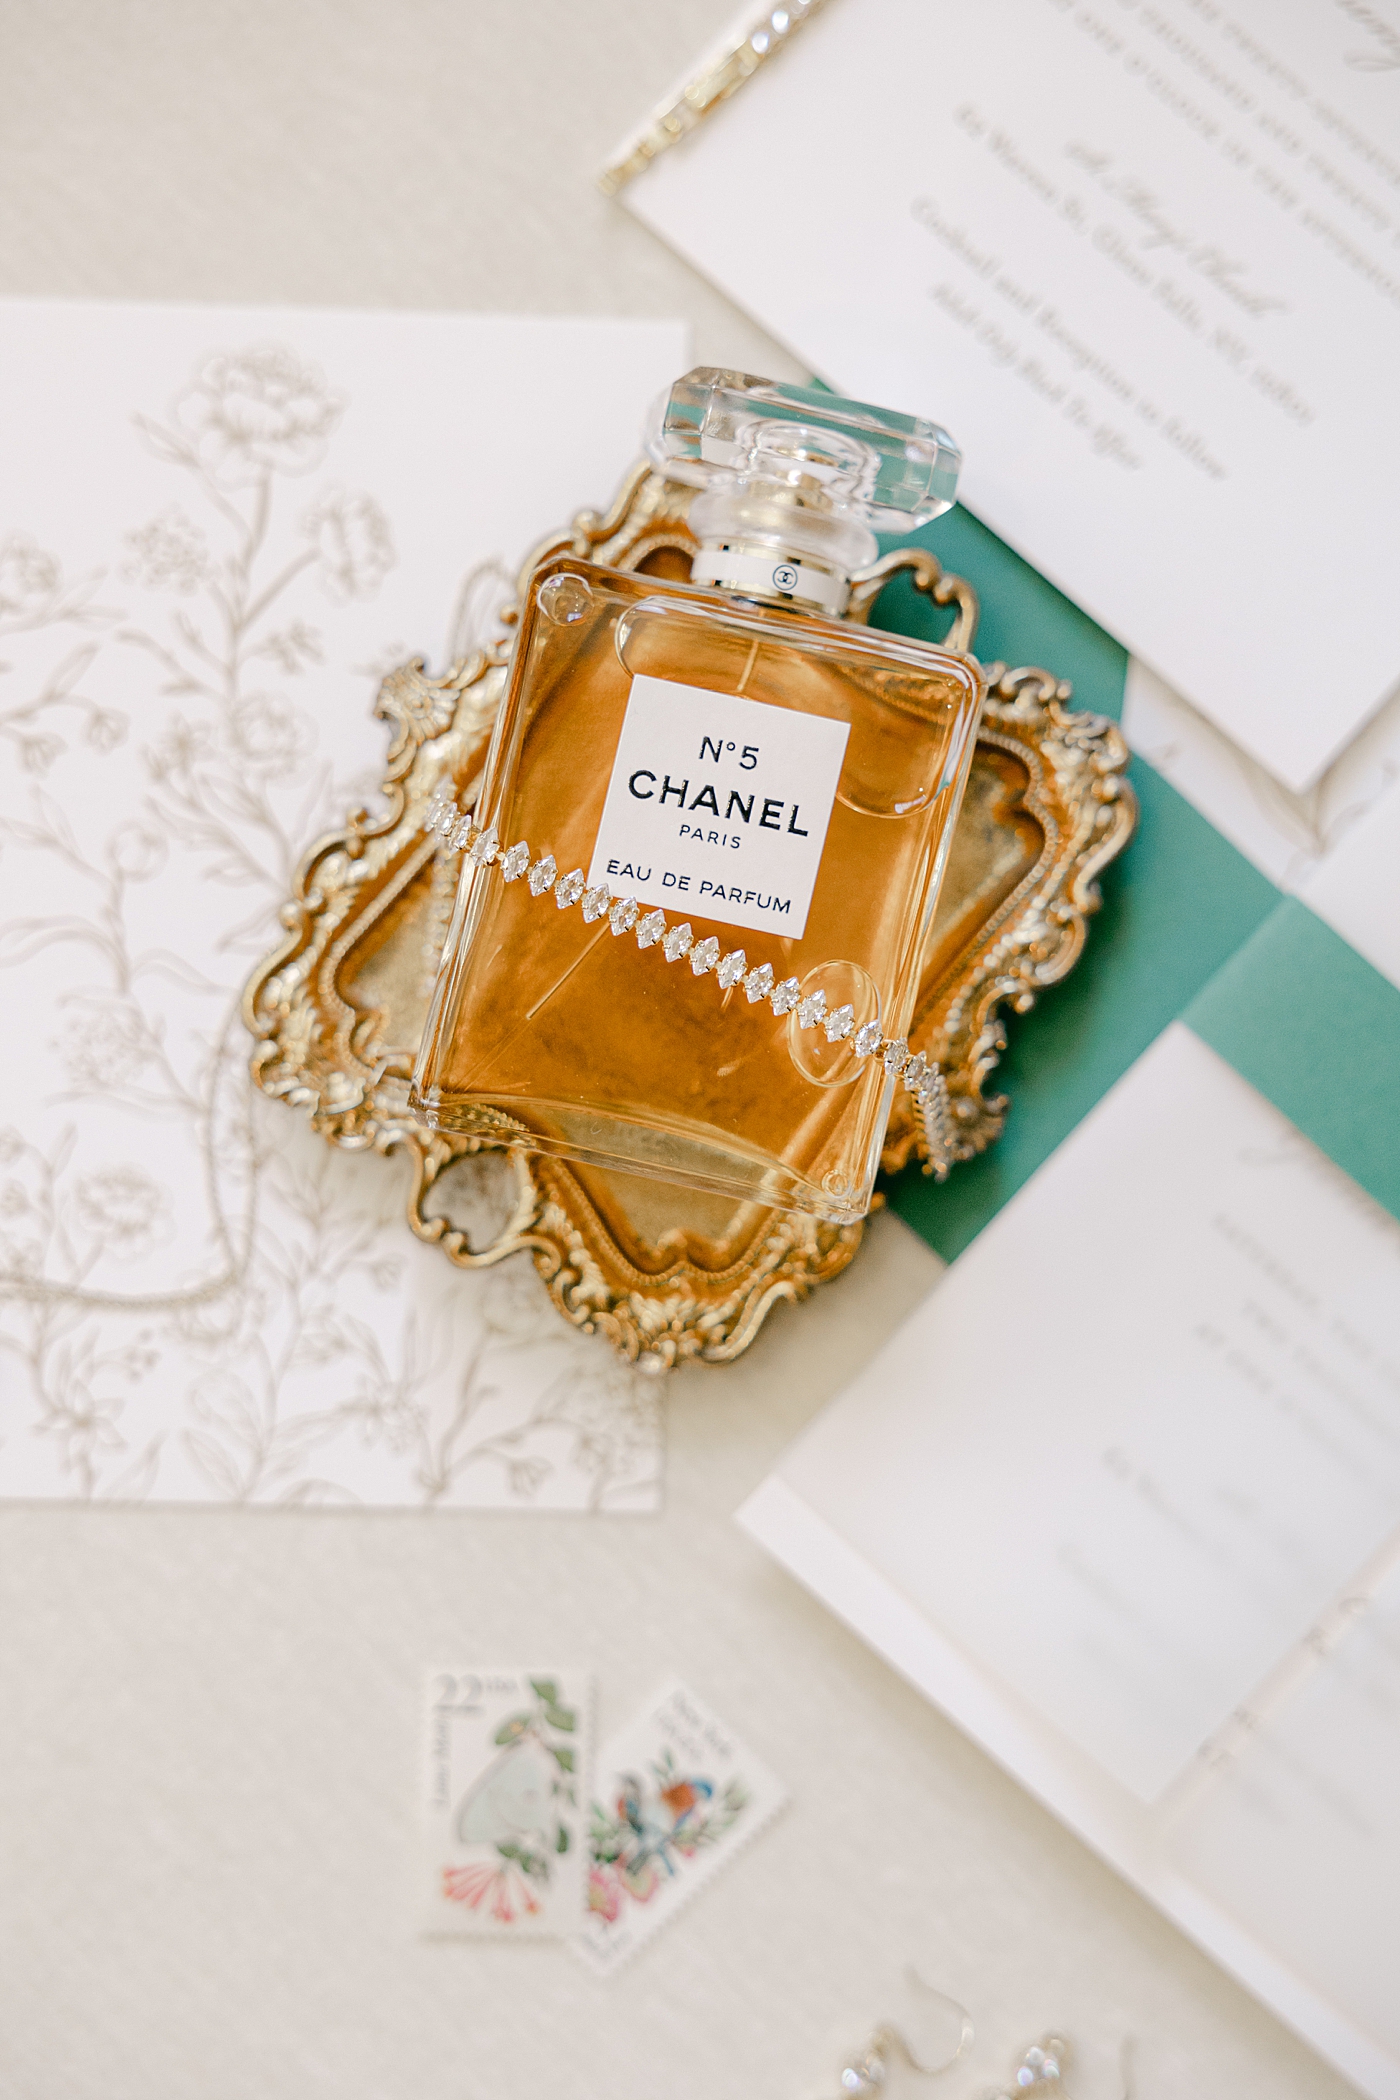 Wedding flat lay detail image of Chanel perfume during their Sagamore Wedding | Image by Hope Helmuth Photography